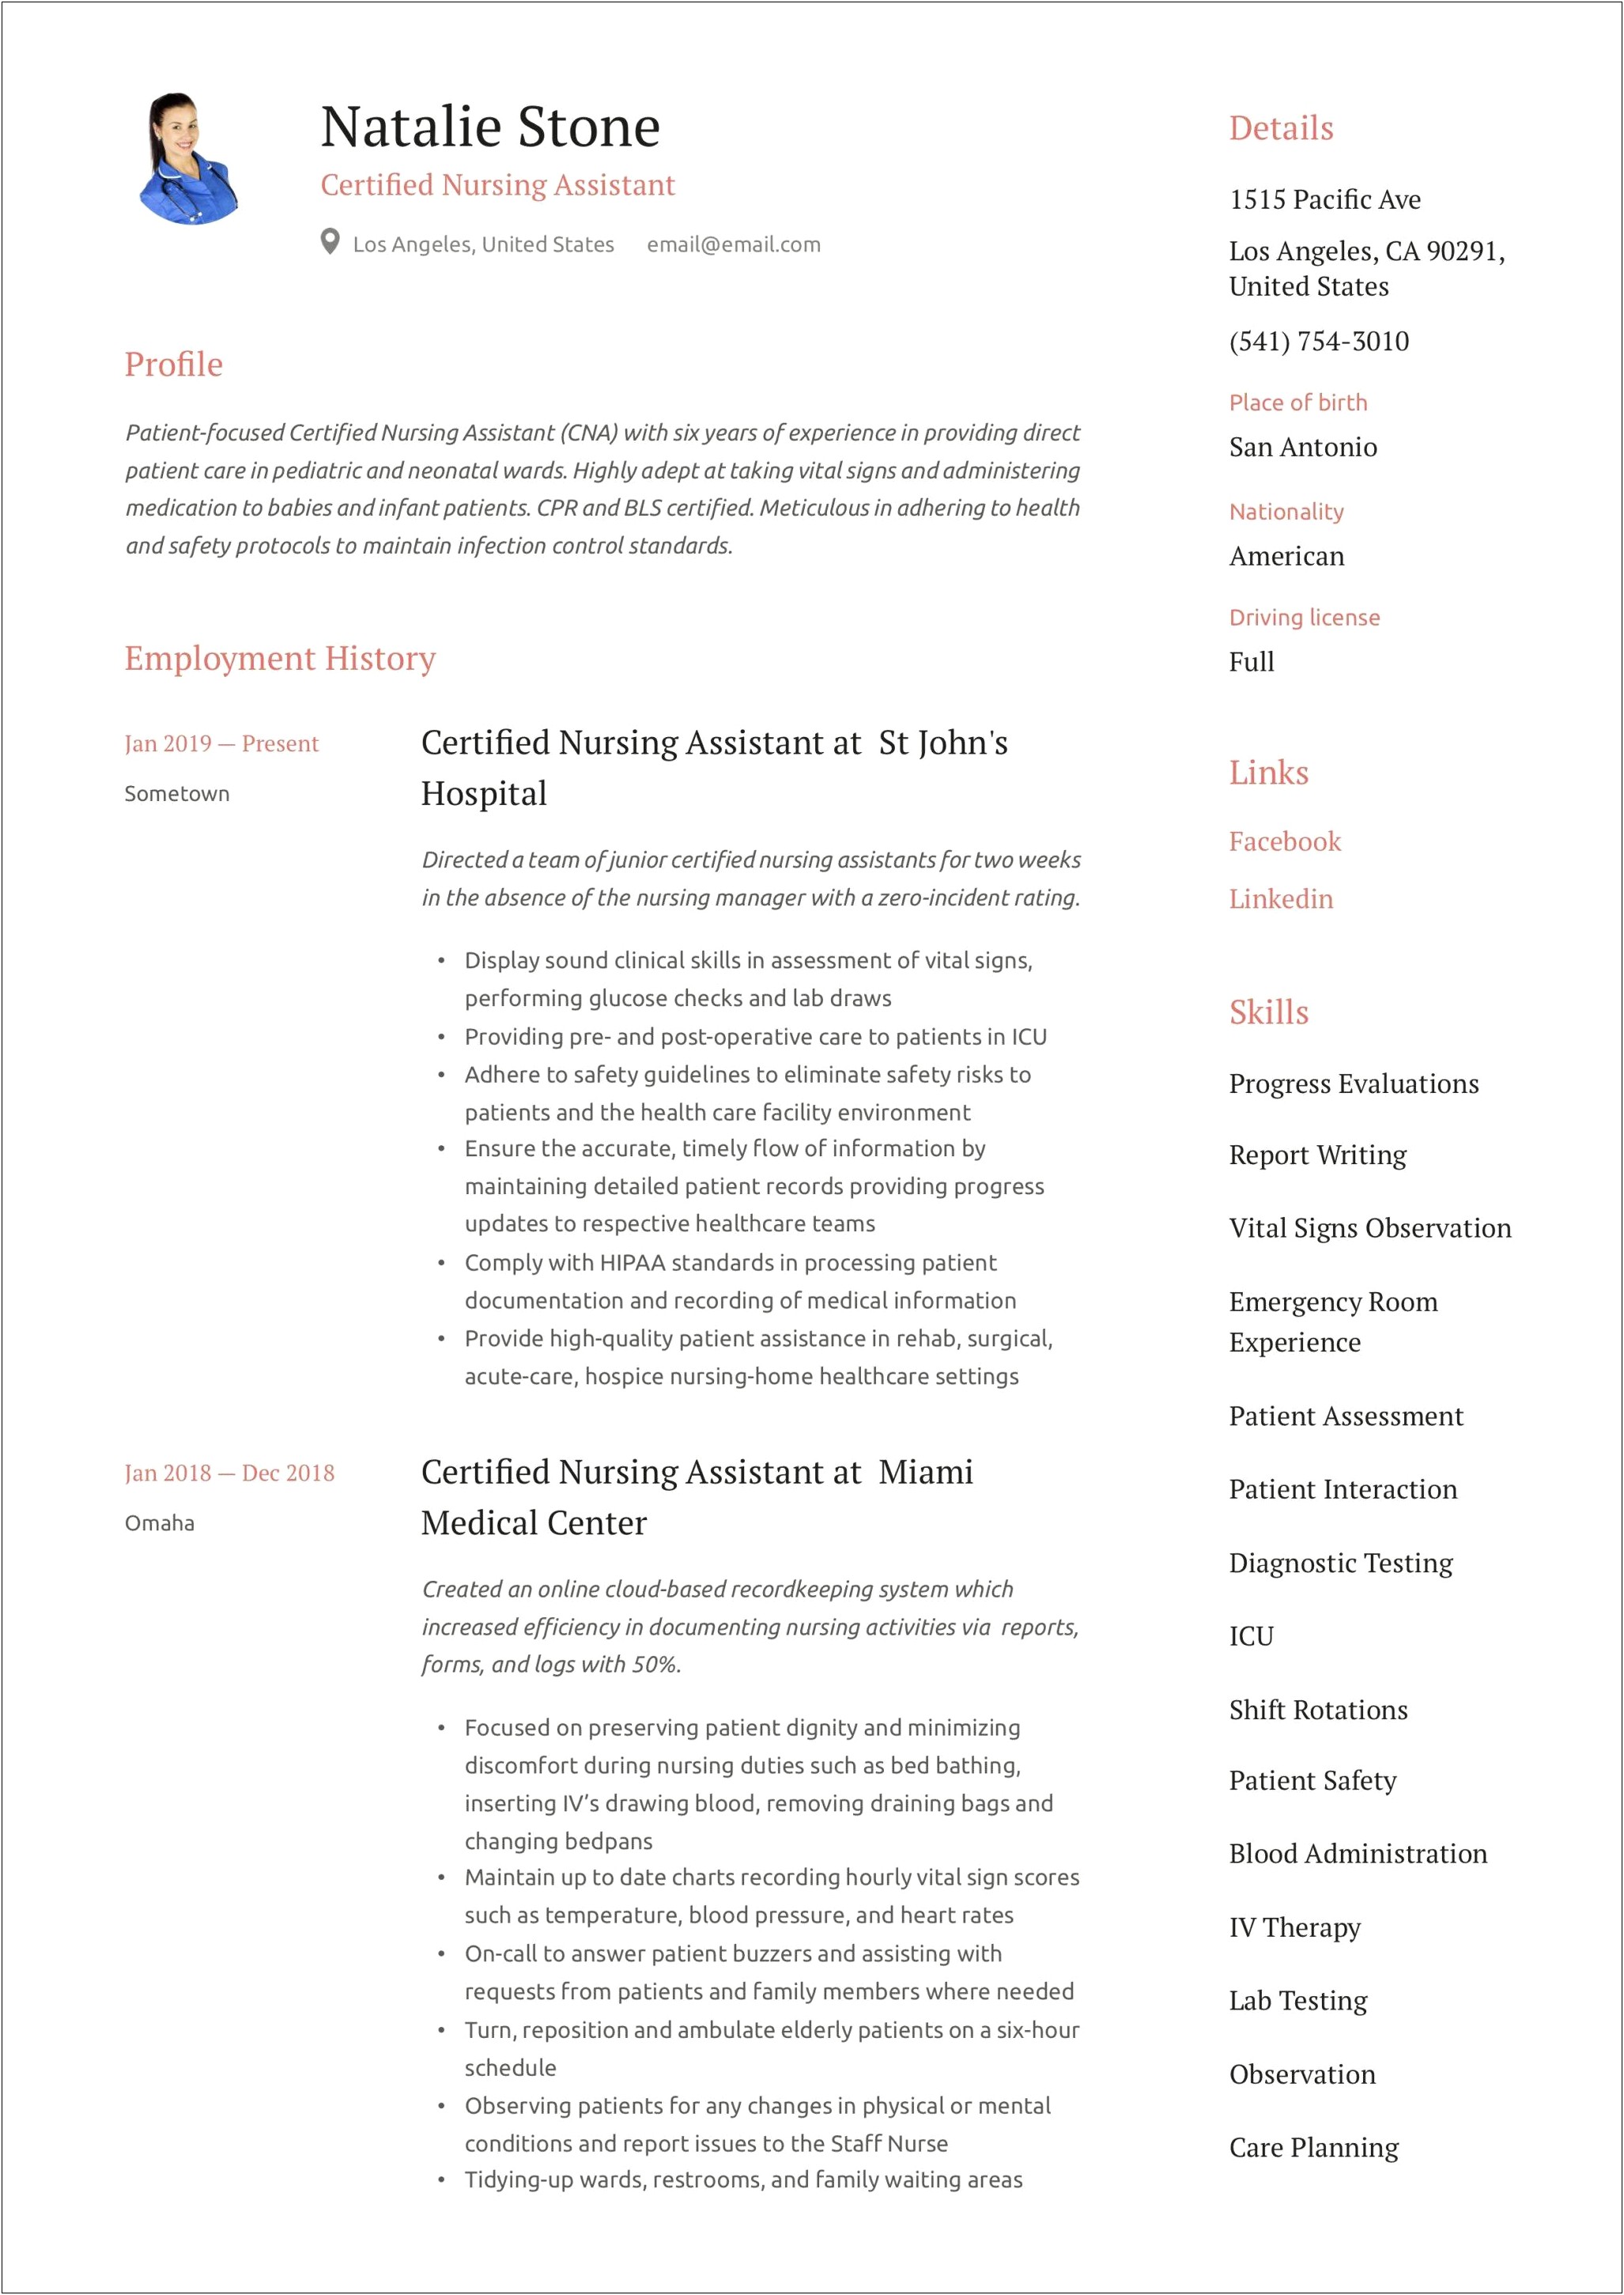 Resume Summary For Certified Nursing Assistant